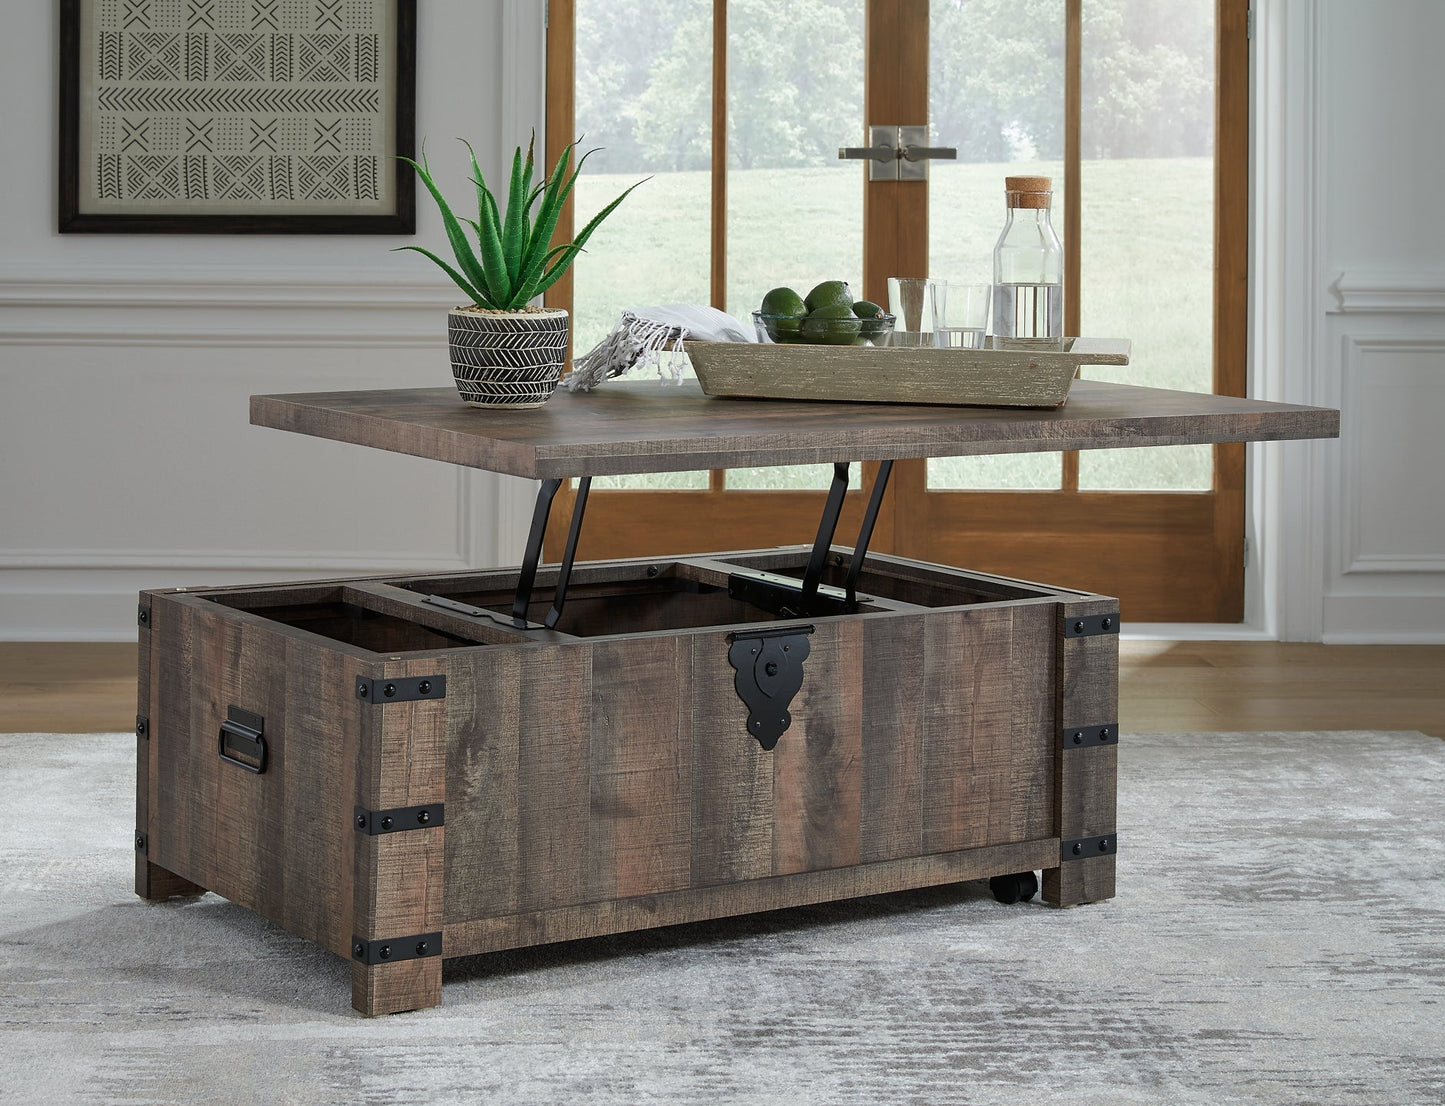 Hollum Lift Top Cocktail Table Rent Wise Rent To Own Jacksonville, Florida